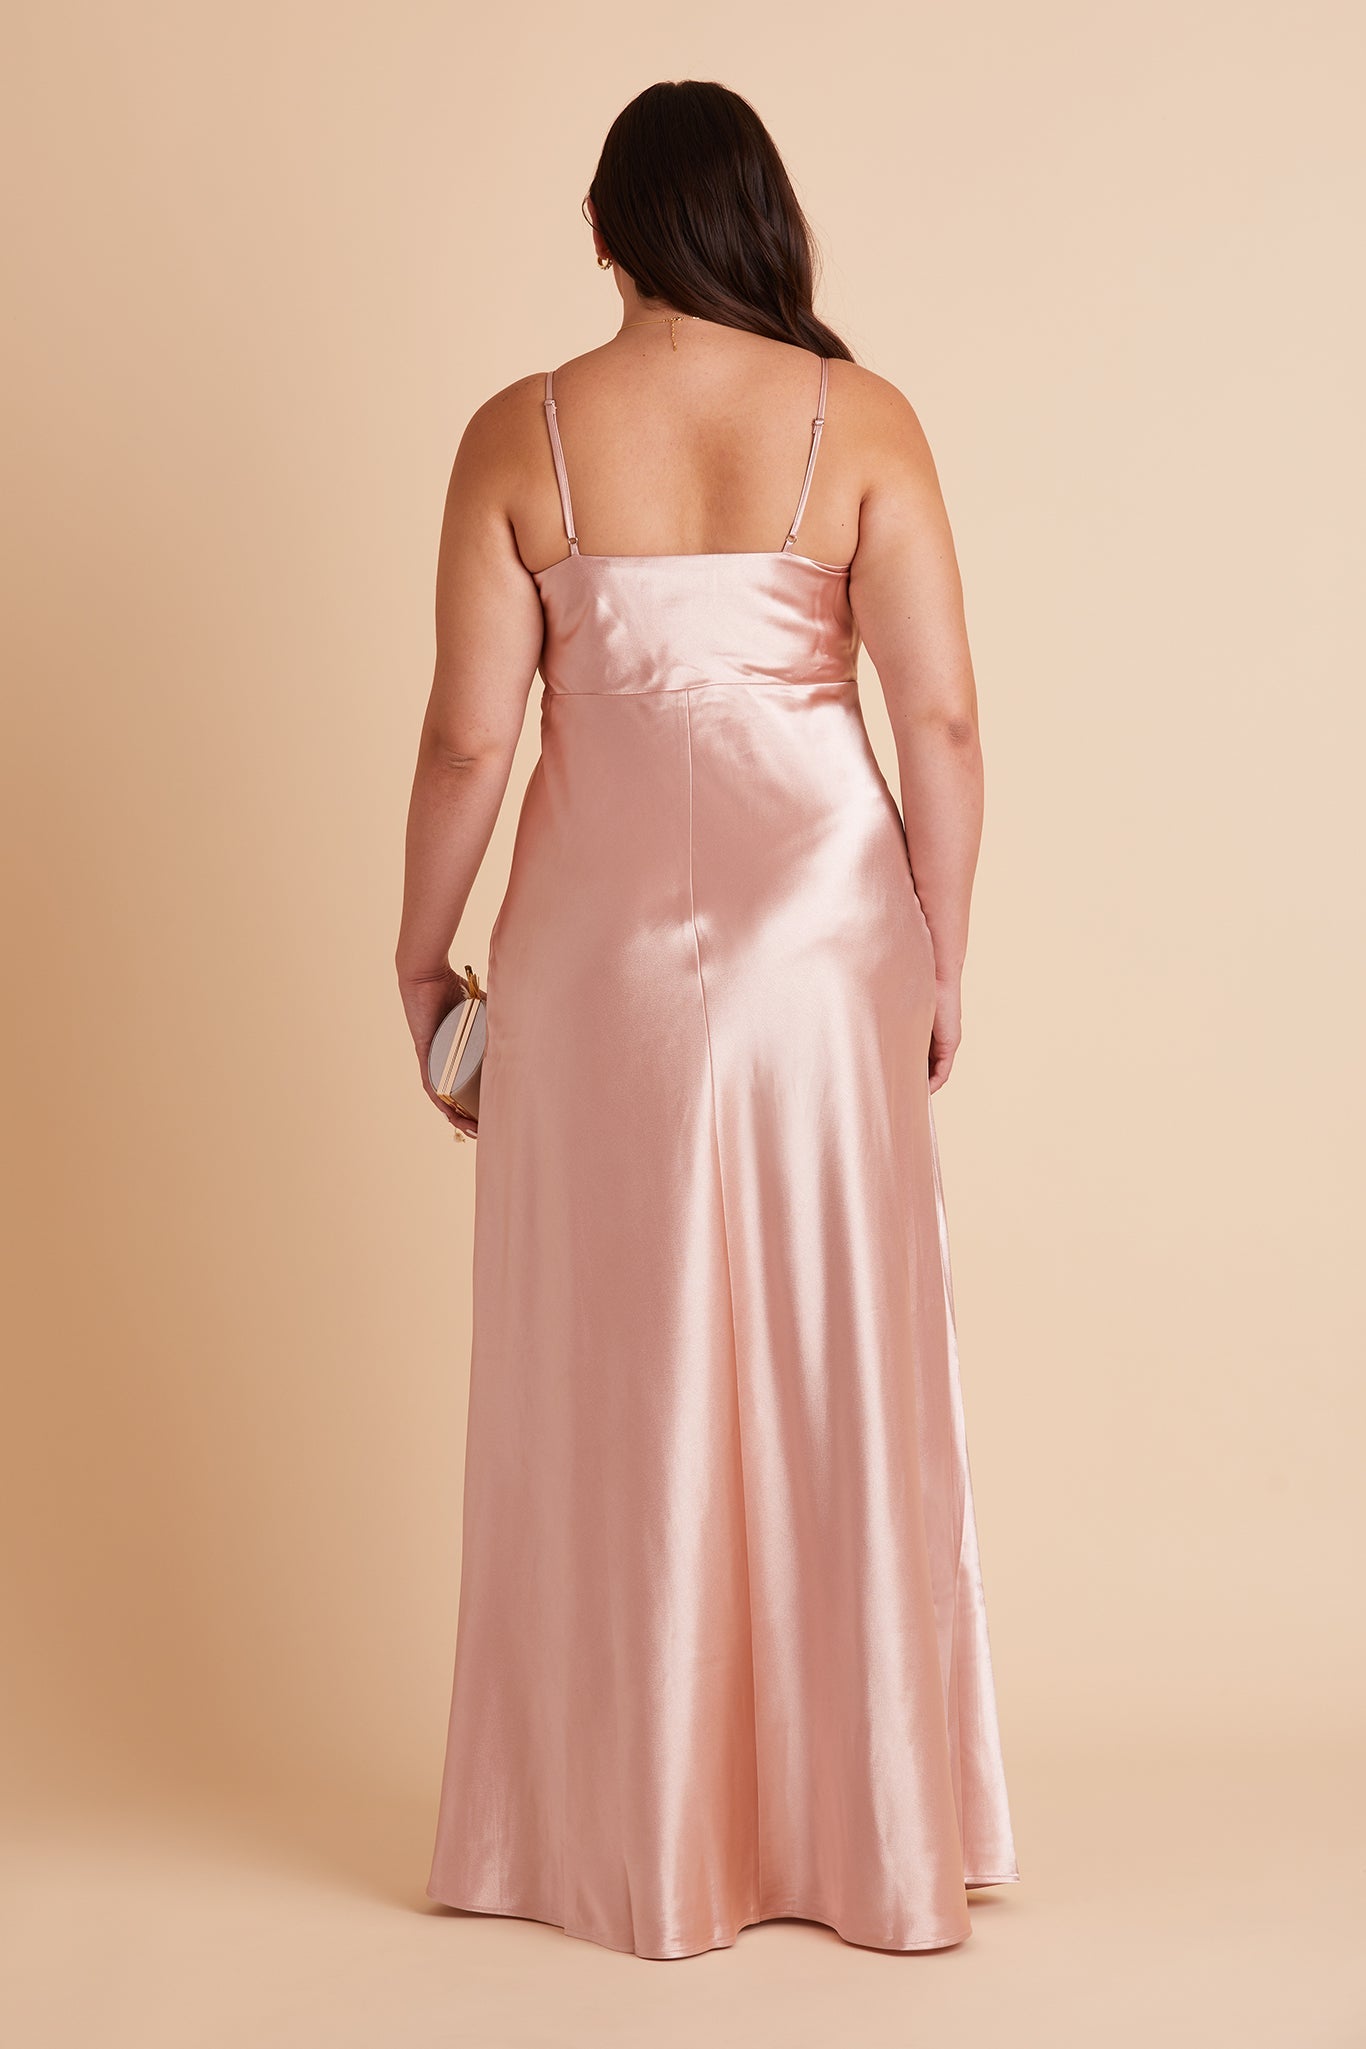 Back view of the Lisa Long Dress Curve Plus Size in rose gold satin shows the back of the dress with adjustable spaghetti straps and a smooth fit in the bodice and waist that attach to a full length skirt.  